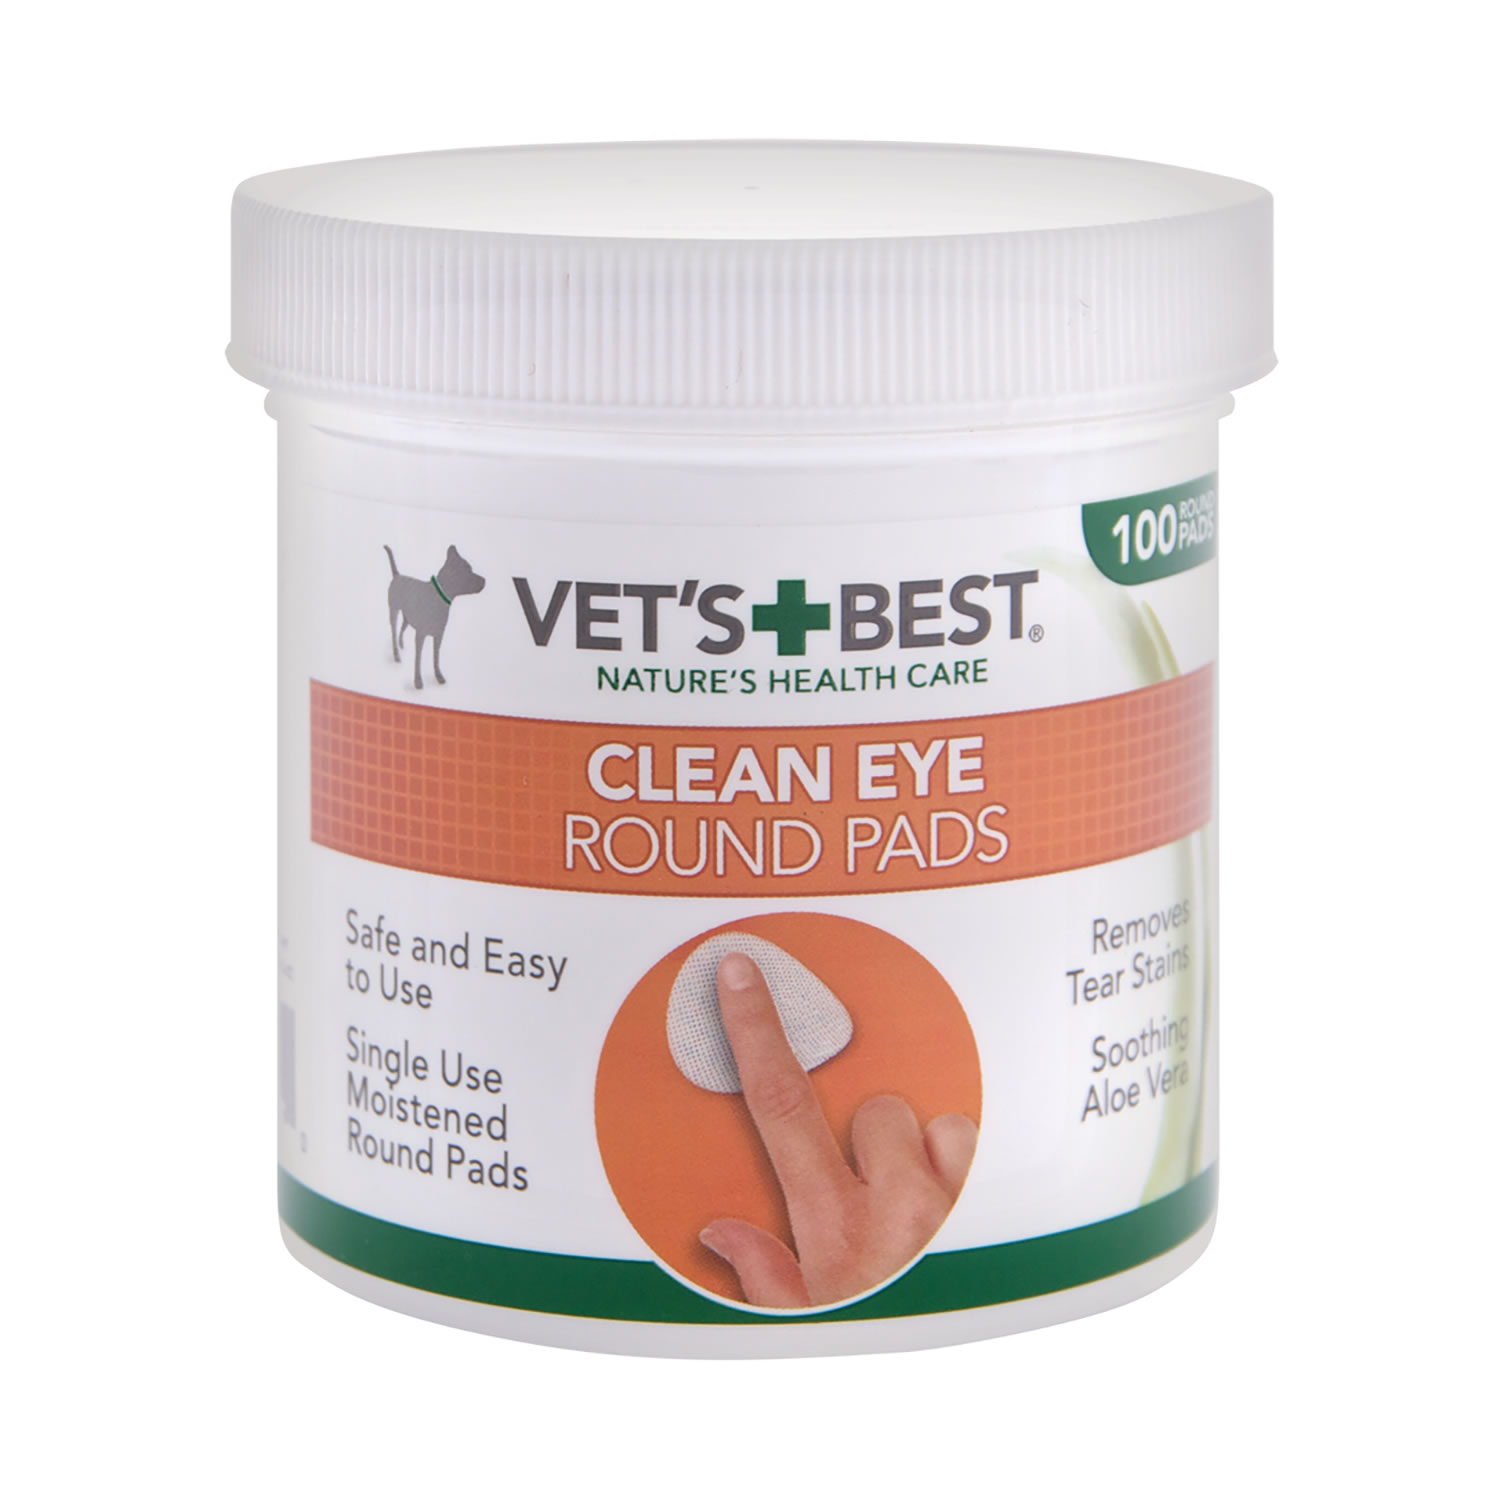 VETS BEST CLEAN EYE ROUND PADS 100 PADS 100 PADS